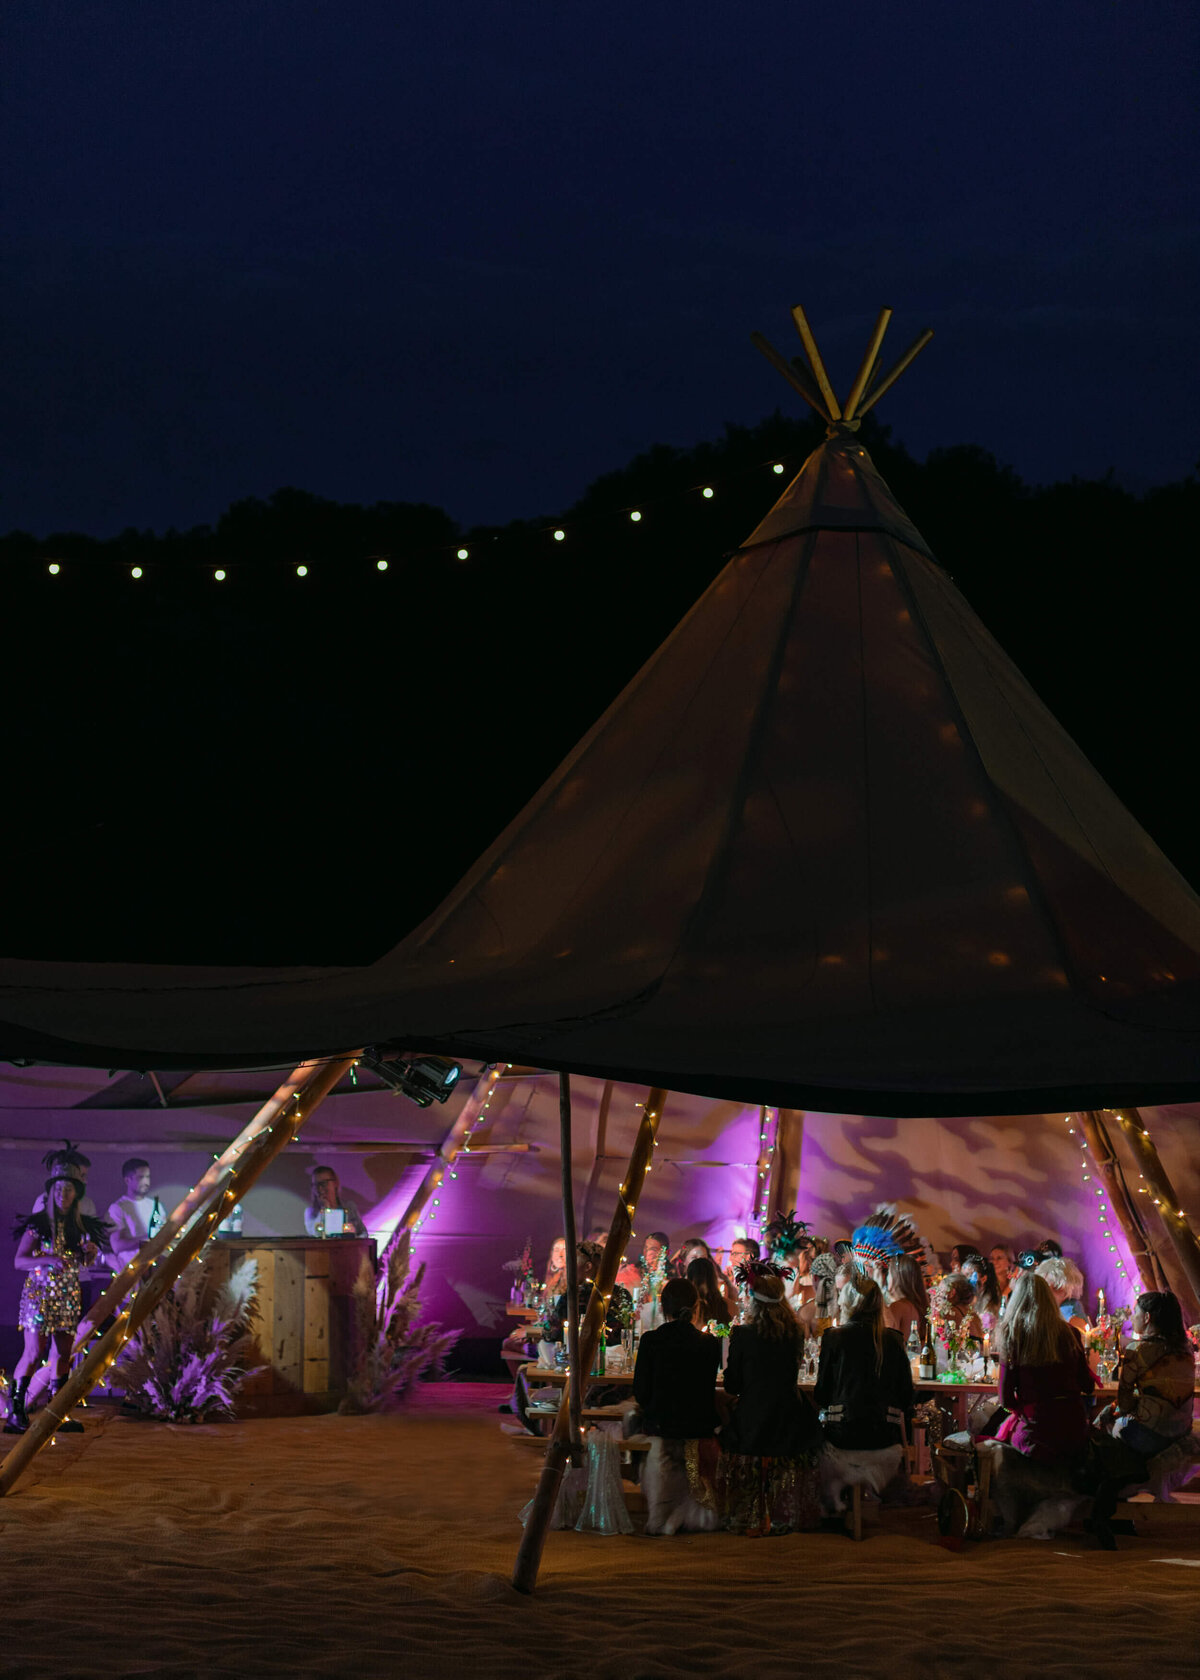 events-birthday-party-gsp-tipi-nighttime-guests-table